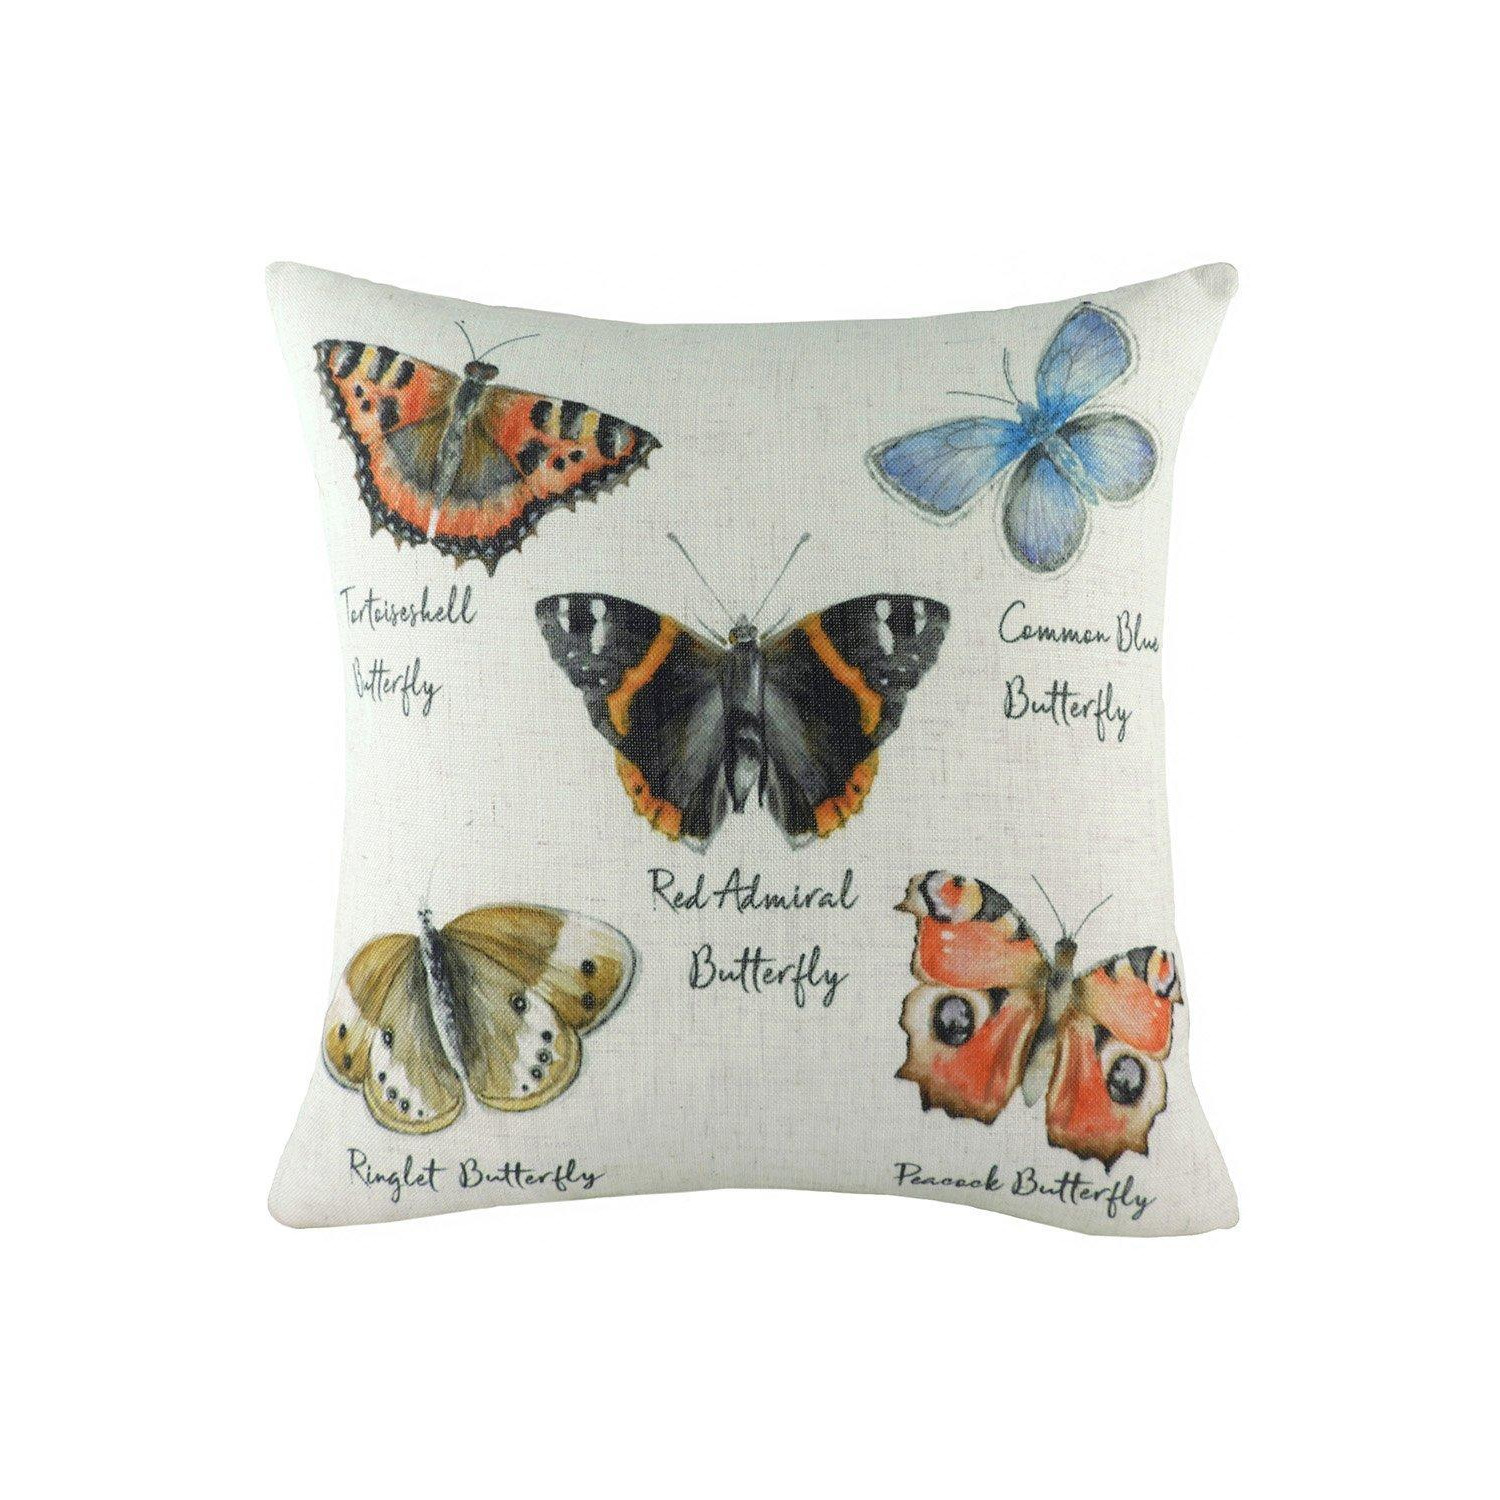 Species Butterfly Hand-Painted Watercolour Printed Cushion - image 1